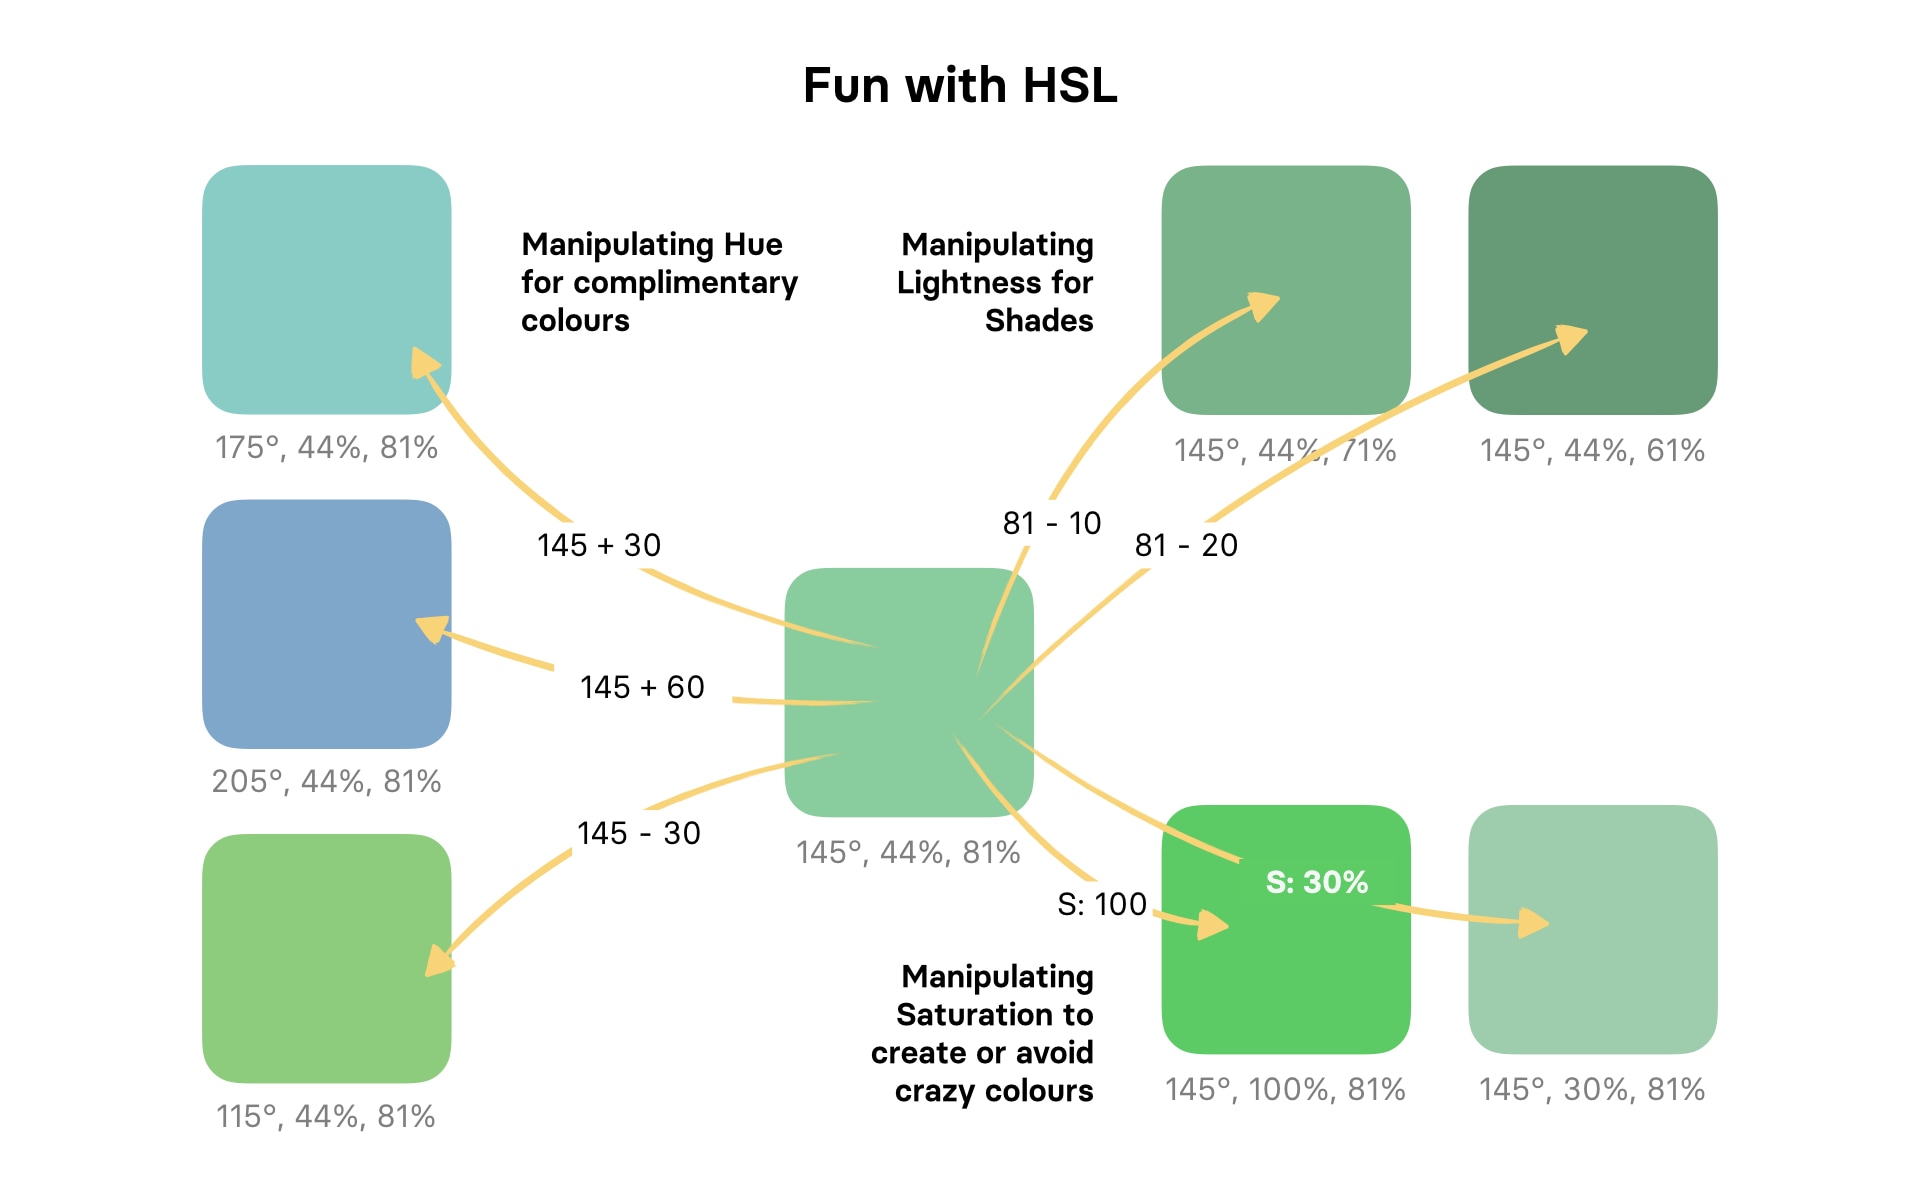 Fun with HSL